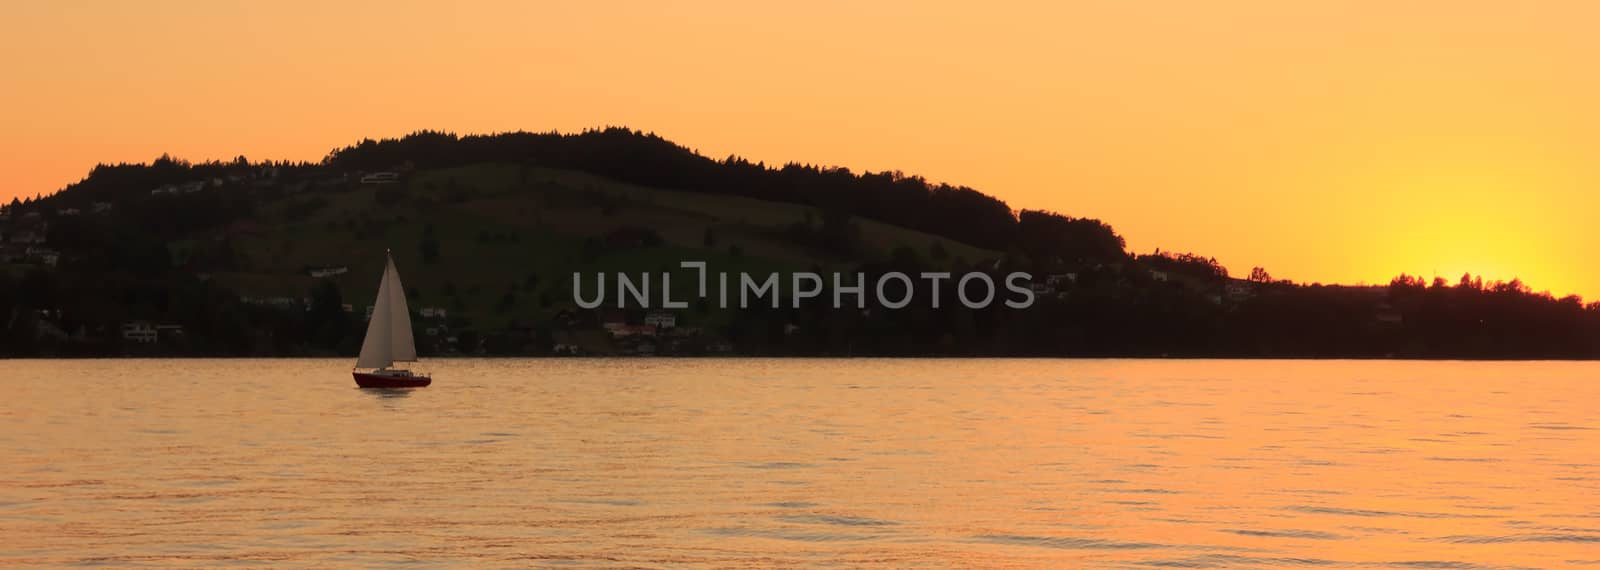 Sailing yacht at sunset on the beautiful Lucerne lake, Switzerla by victorflowerfly